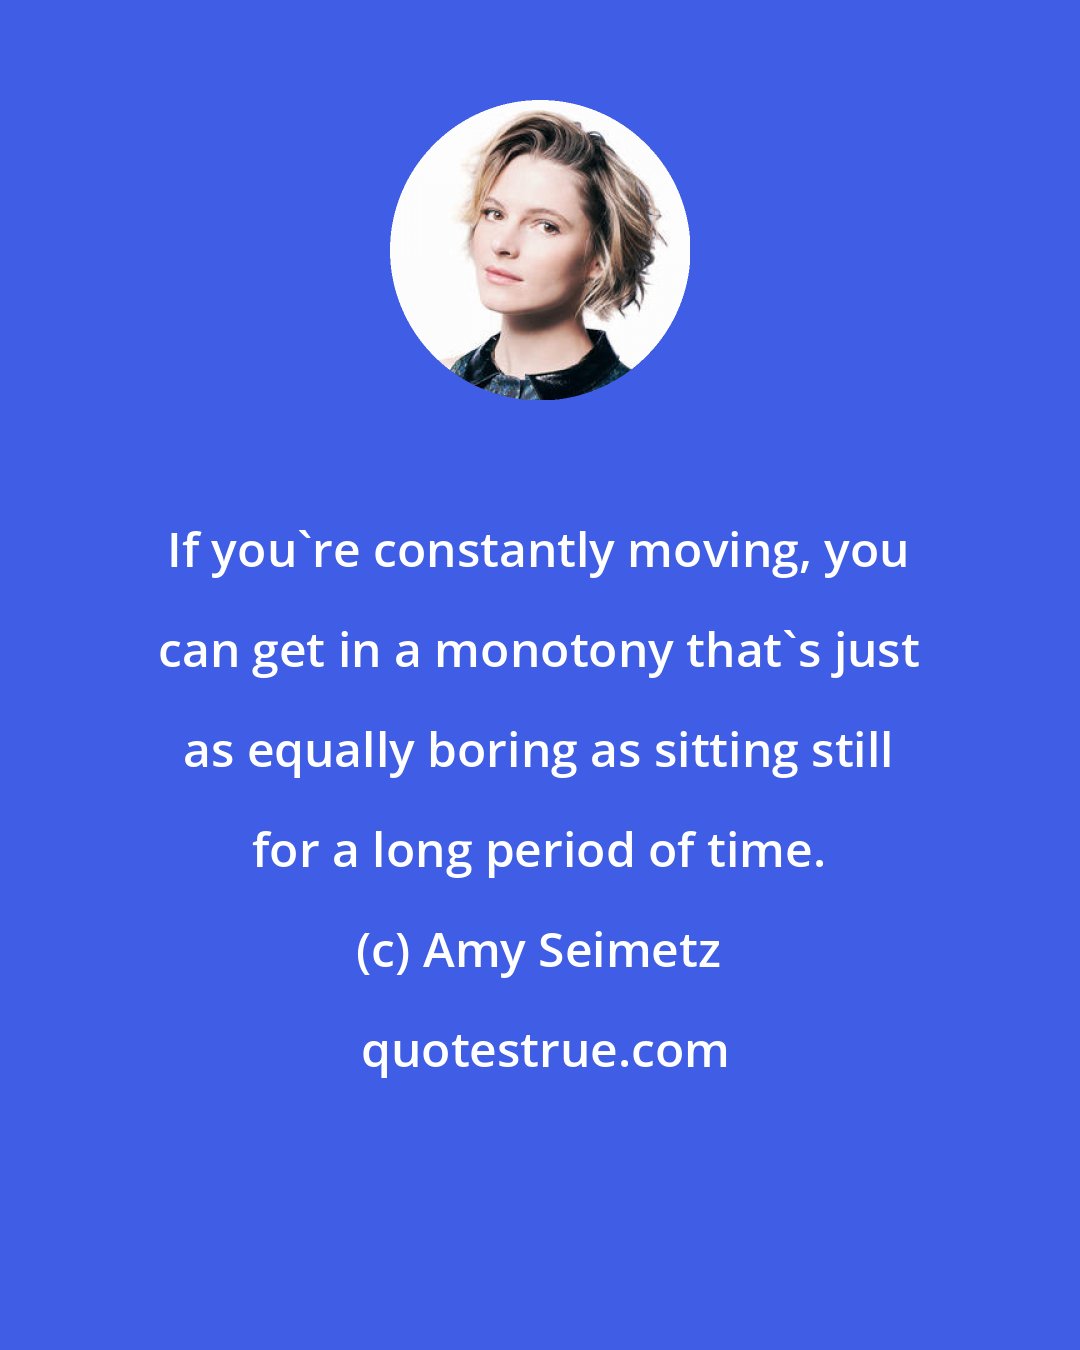 Amy Seimetz: If you're constantly moving, you can get in a monotony that's just as equally boring as sitting still for a long period of time.